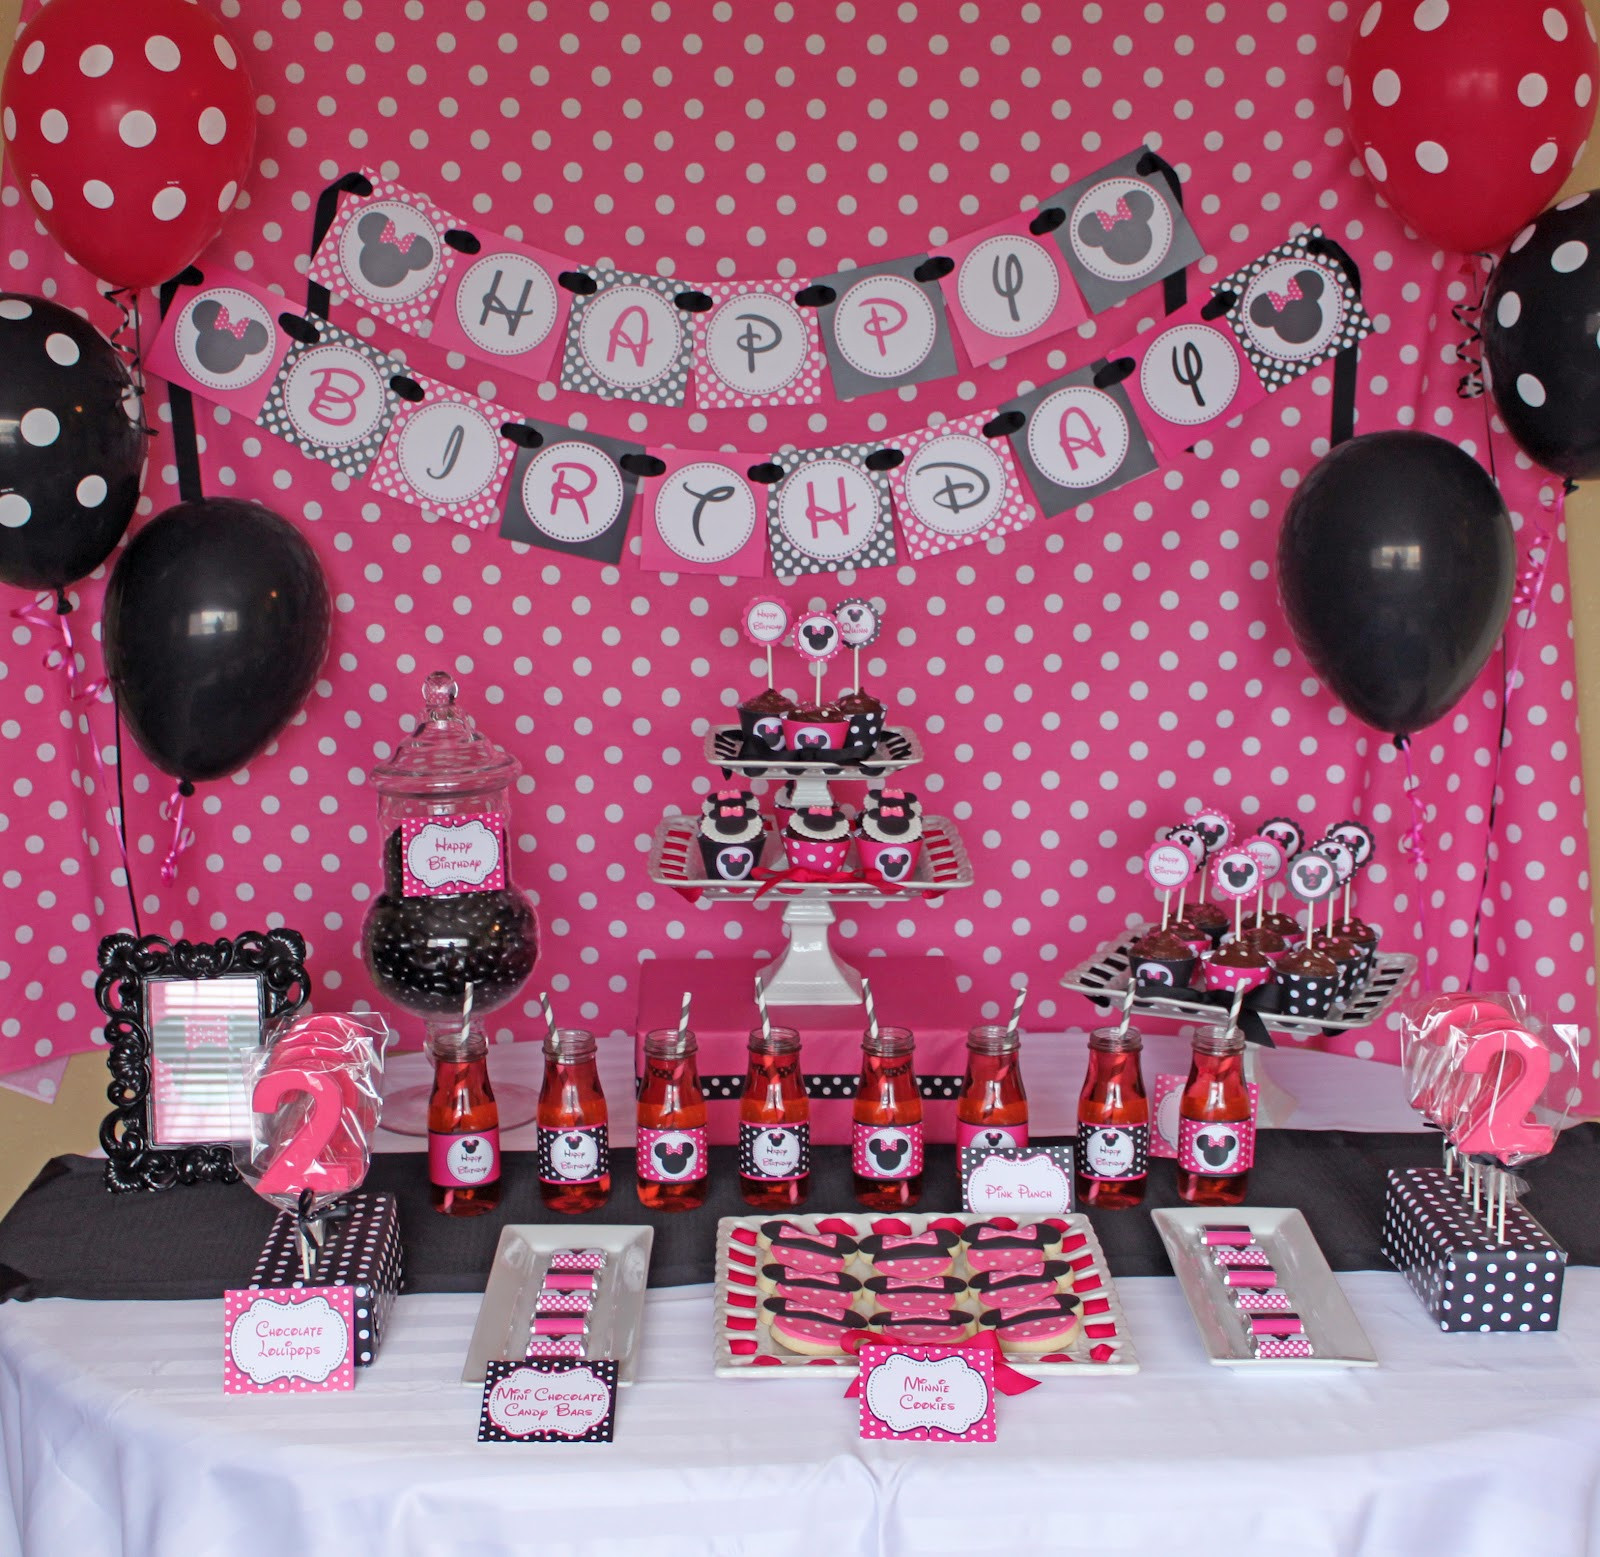 Minnie Birthday Party Ideas
 Minnie Mouse Party Decorations